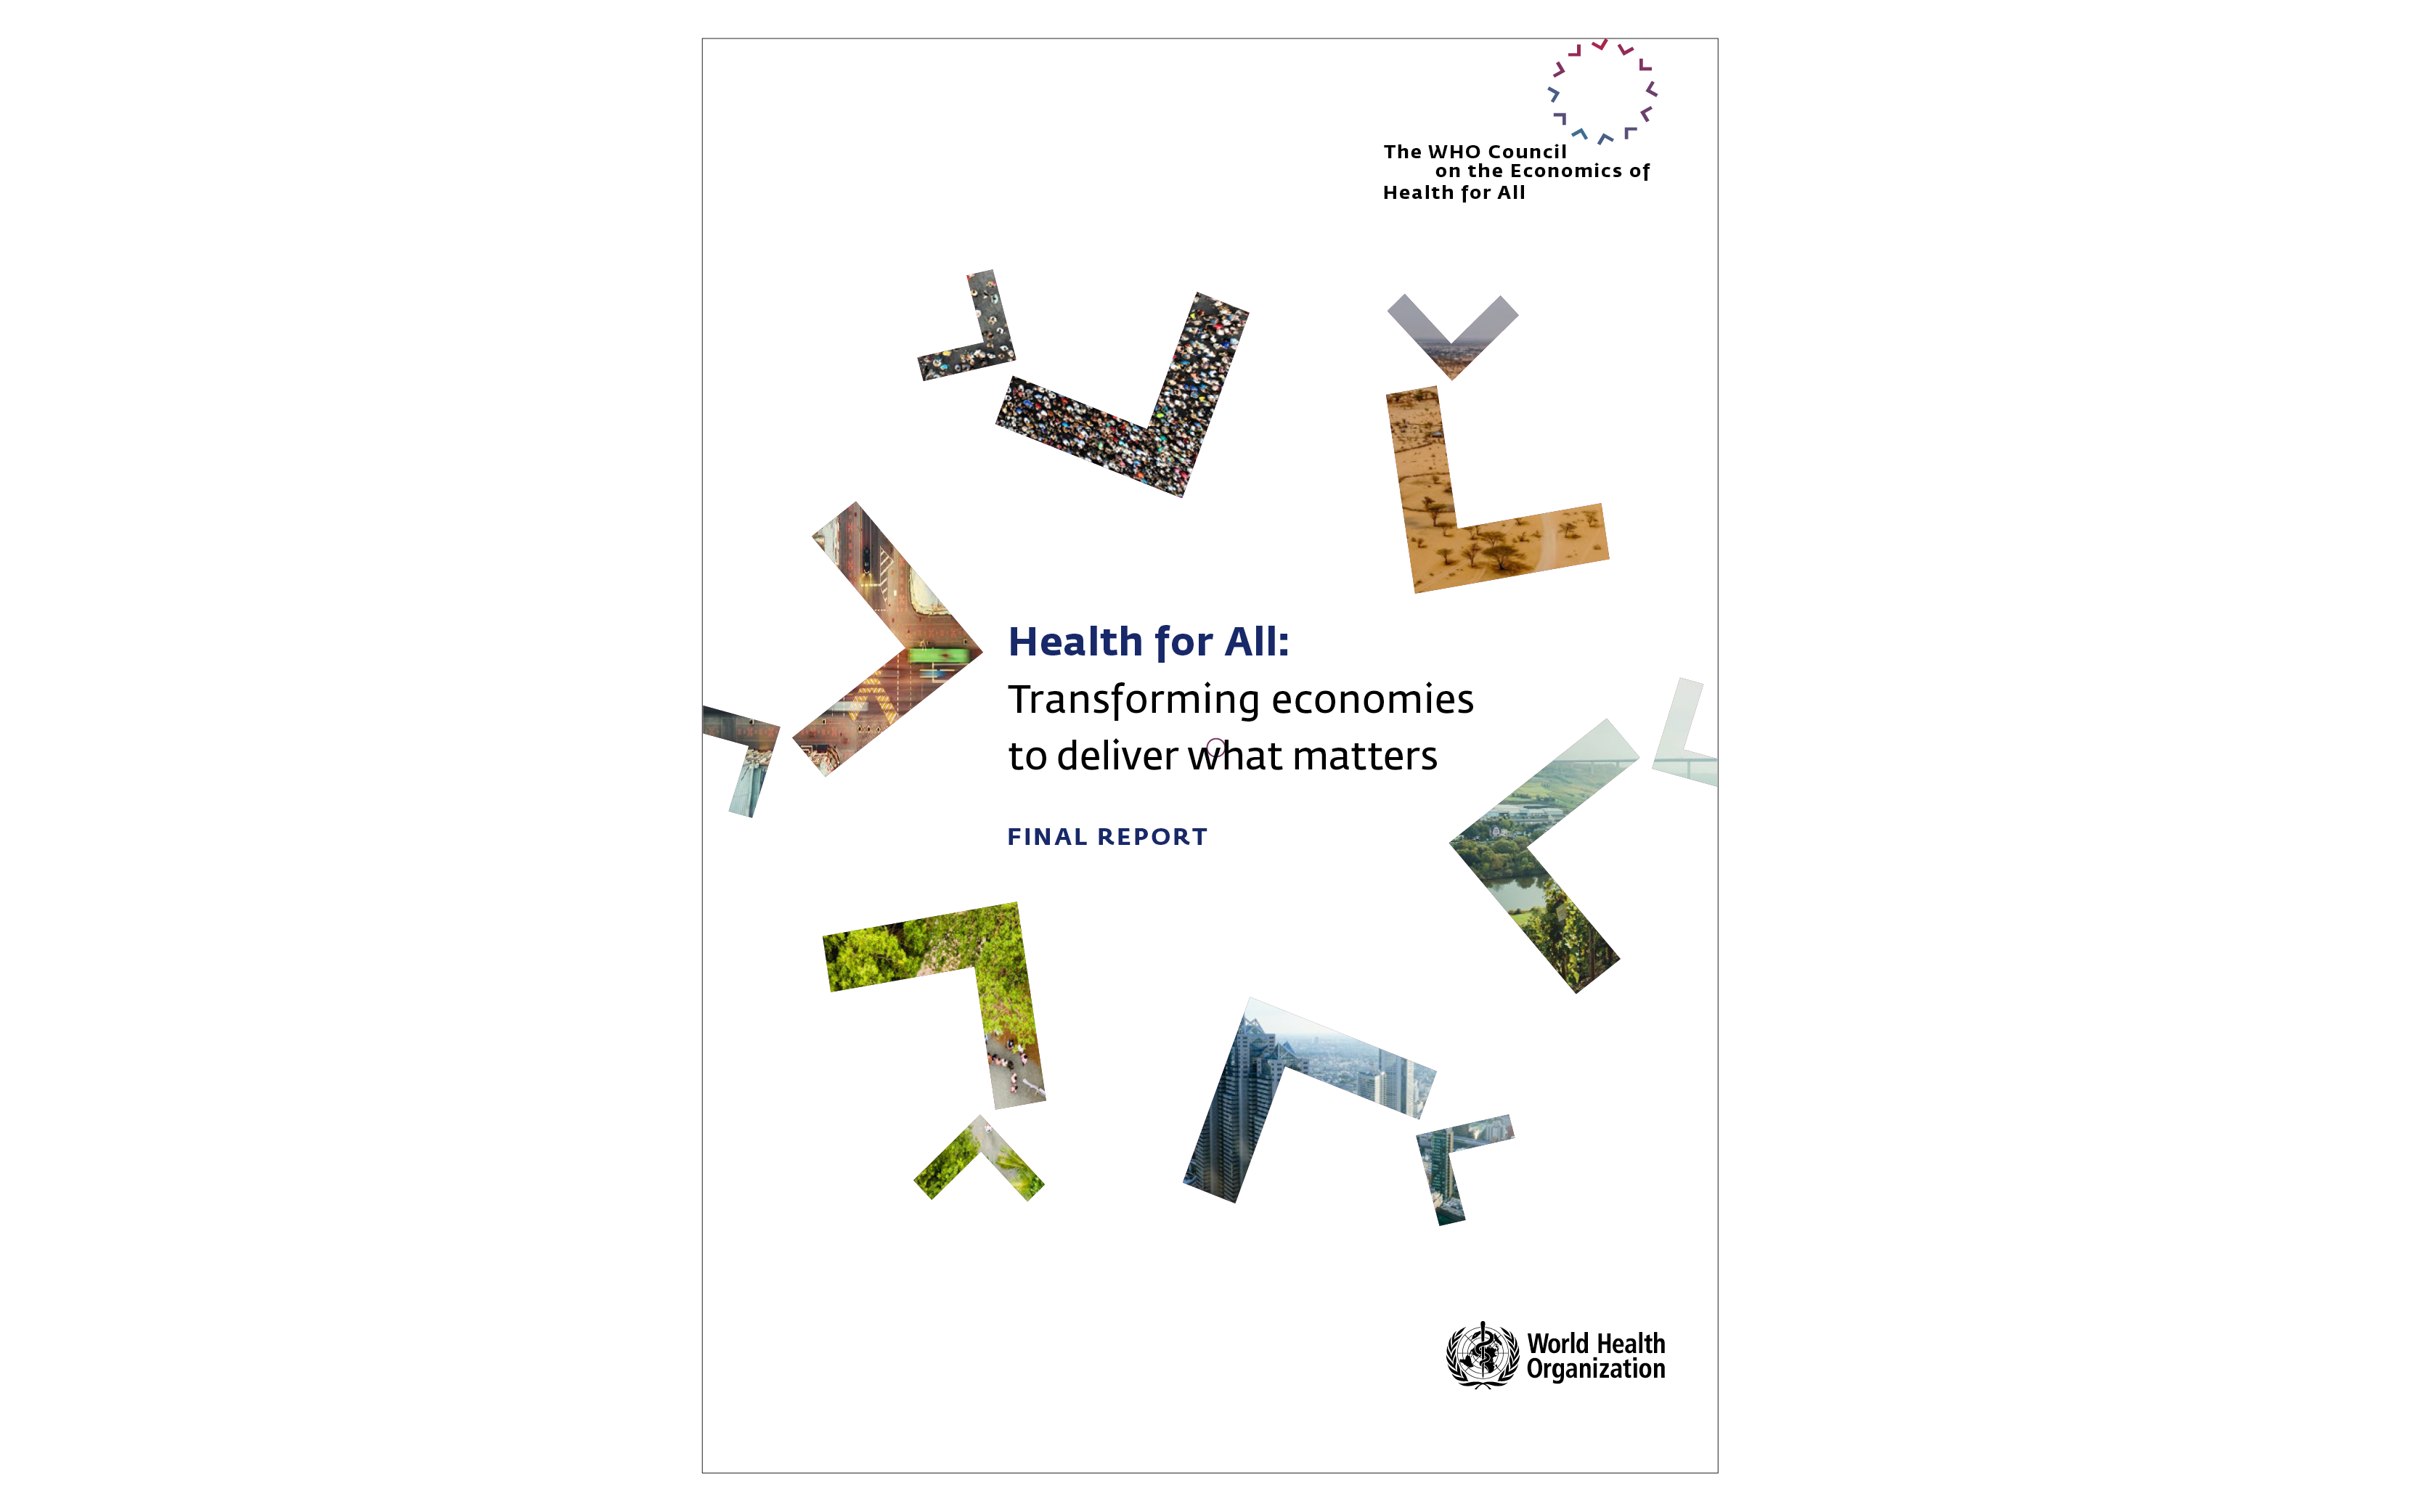 Final Report of the WHO Council on the Economics of Health for All